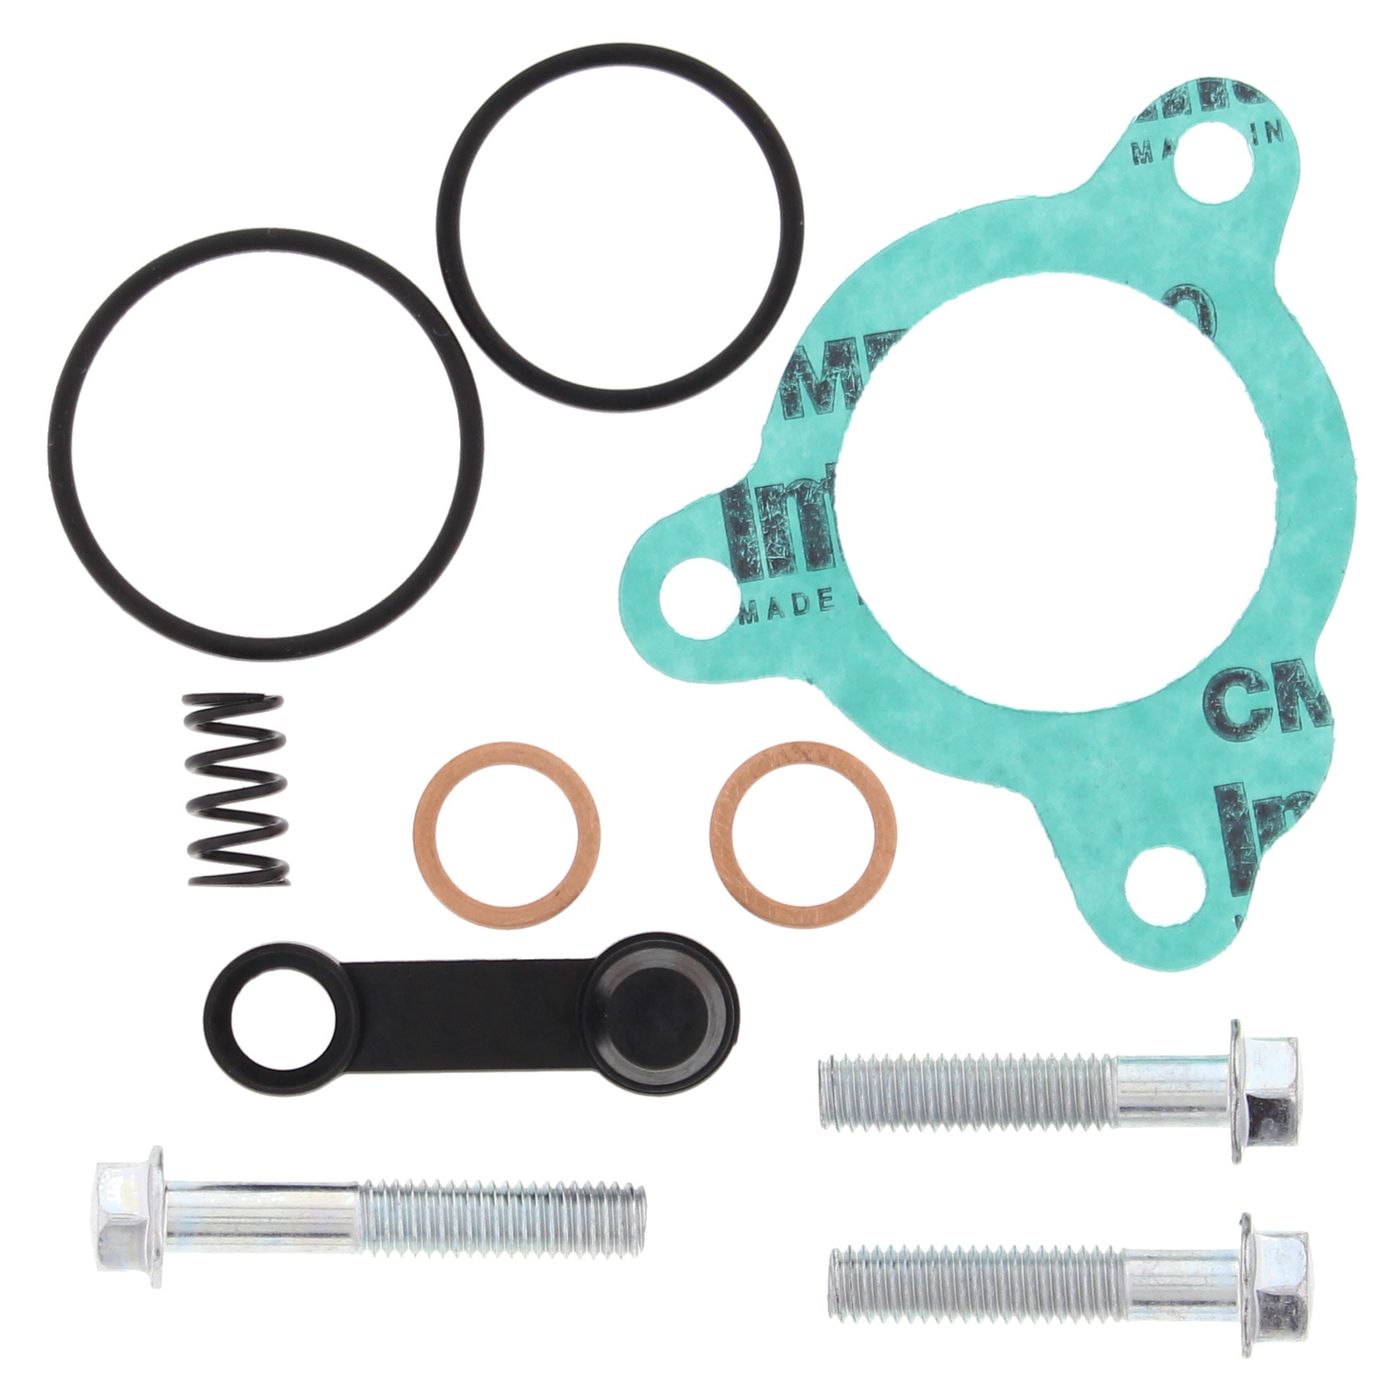 Wrp Clutch Slave Cylinder Kits - WRP186001 image